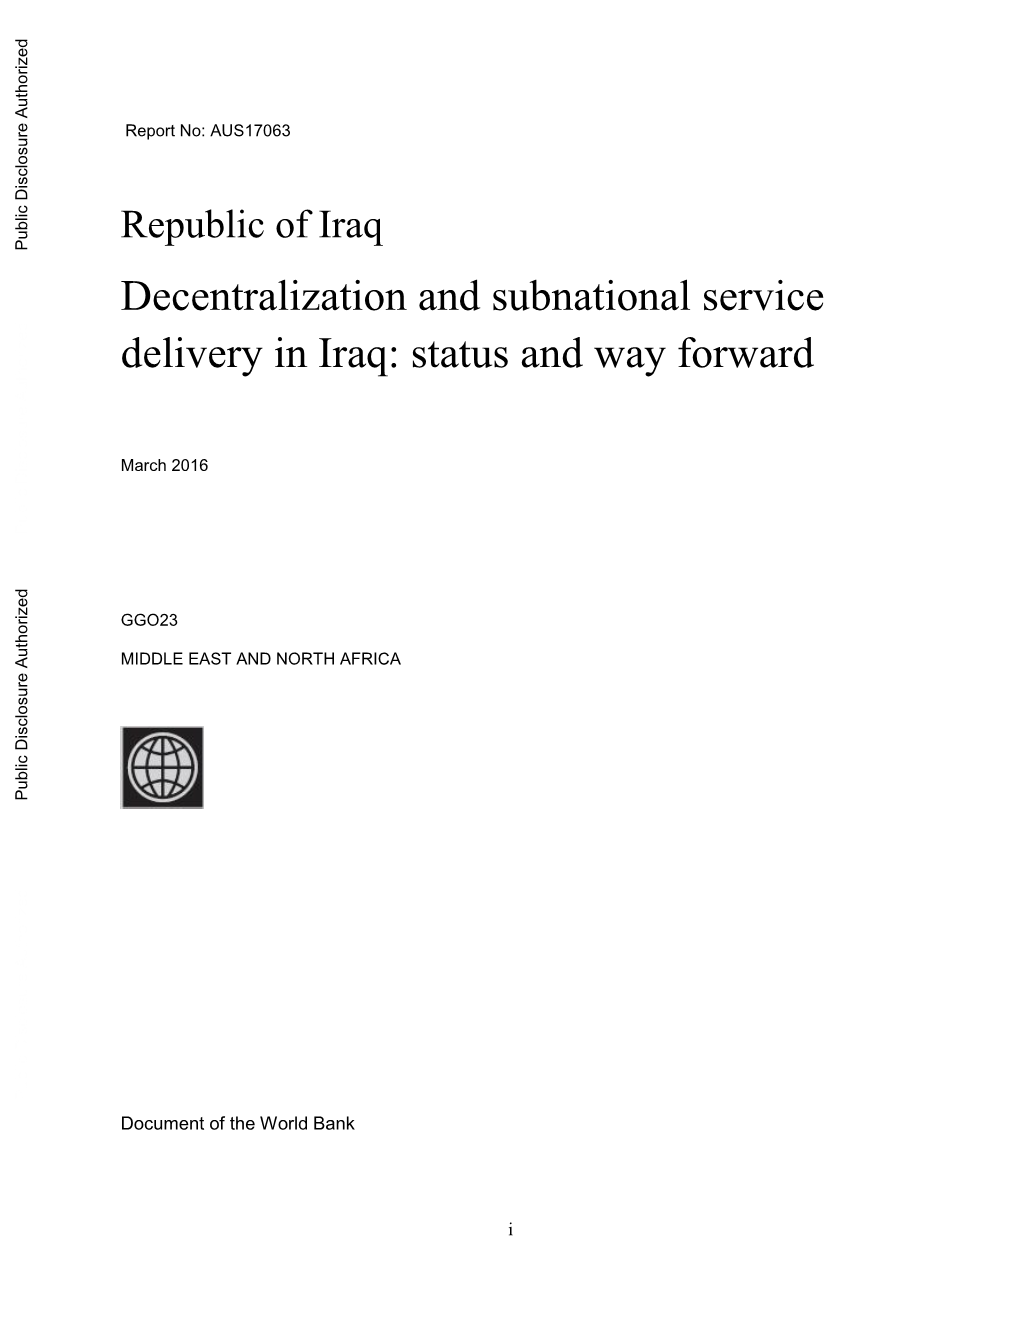 Republic of Iraq Public Disclosure Authorized Decentralization and Subnational Service Delivery in Iraq: Status and Way Forward